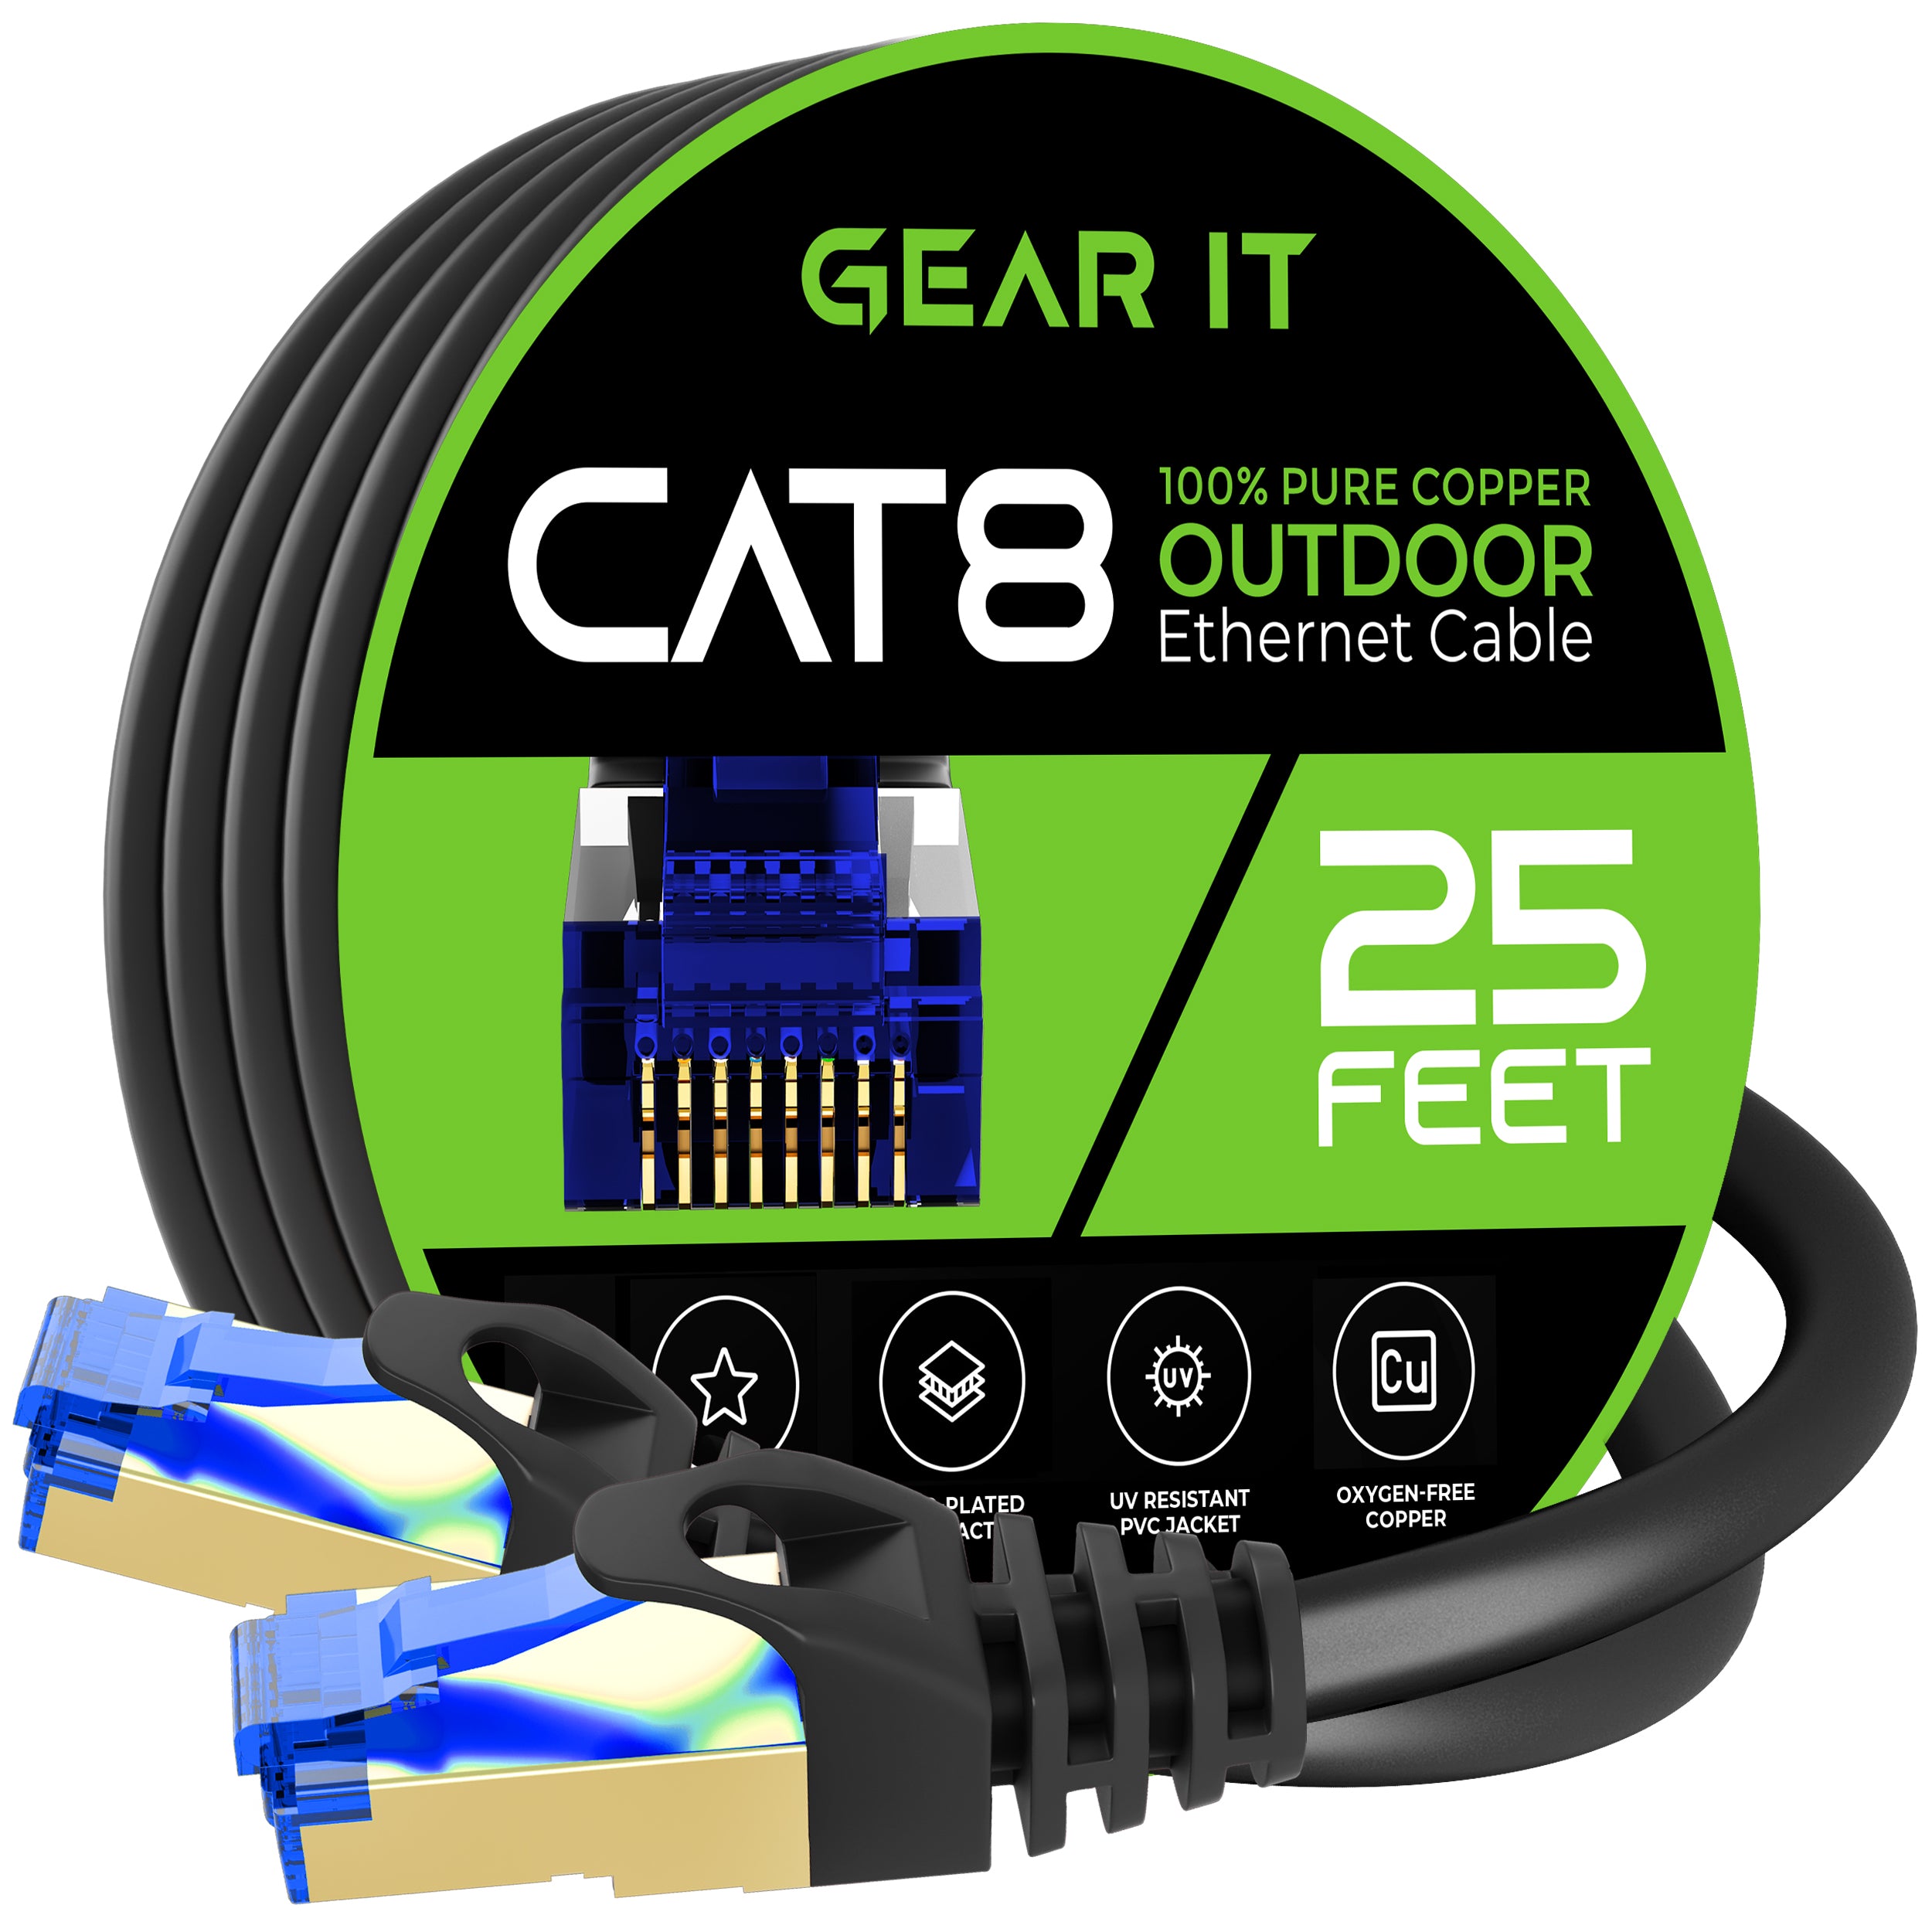 What Is Cat8?